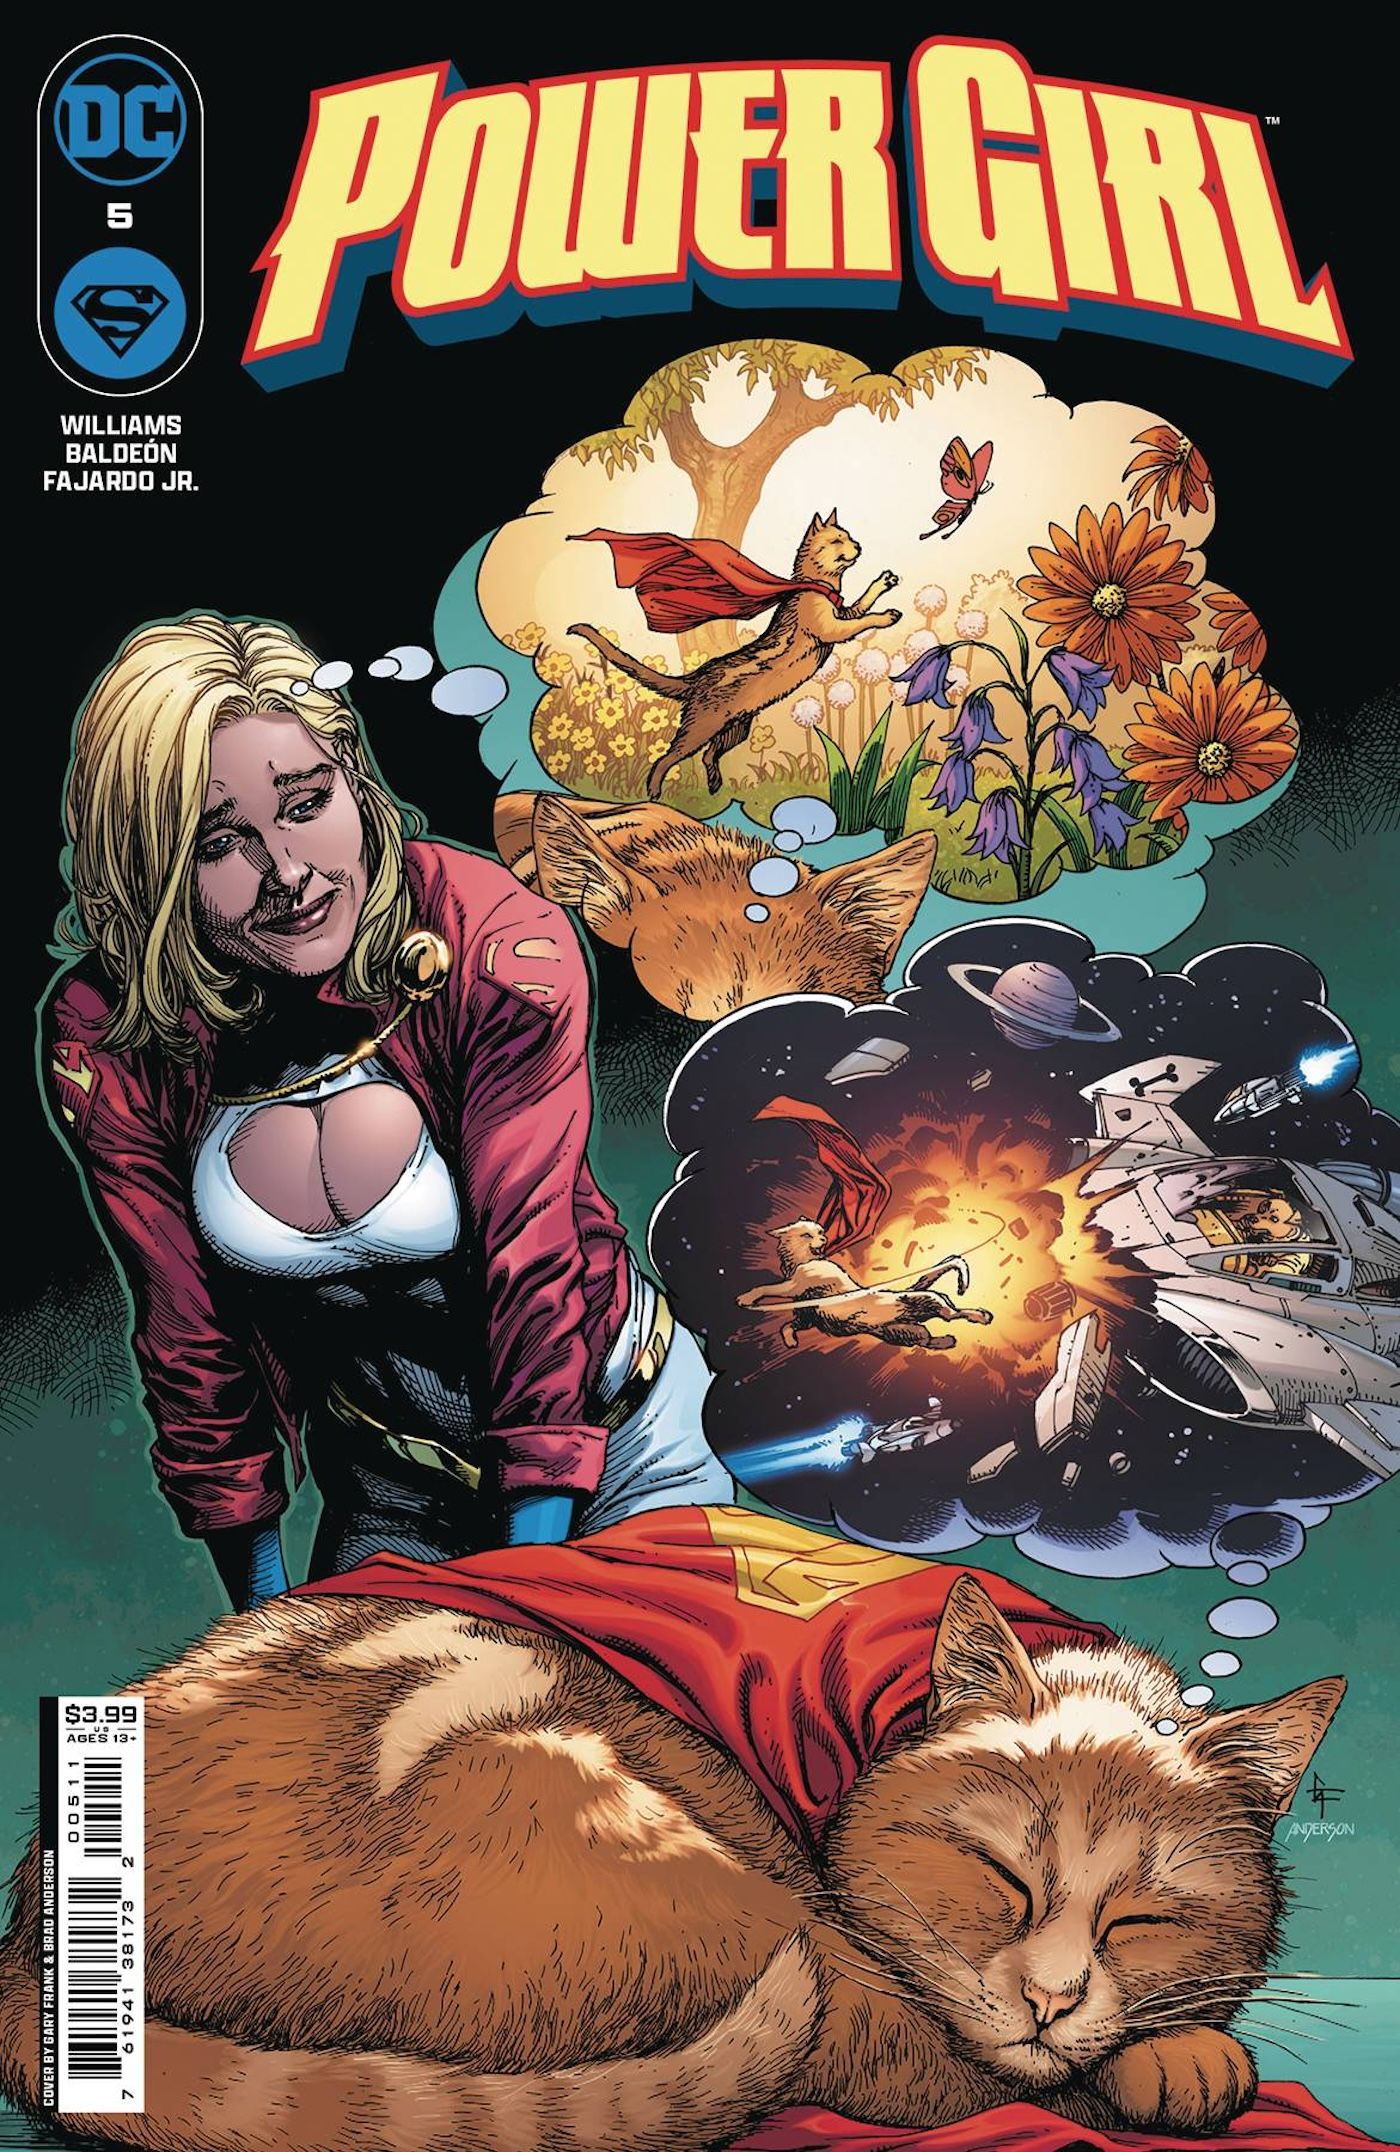 Power Girl 5 Main Cover: Power Girl looking at a sleeping Streaky the Super Cat.